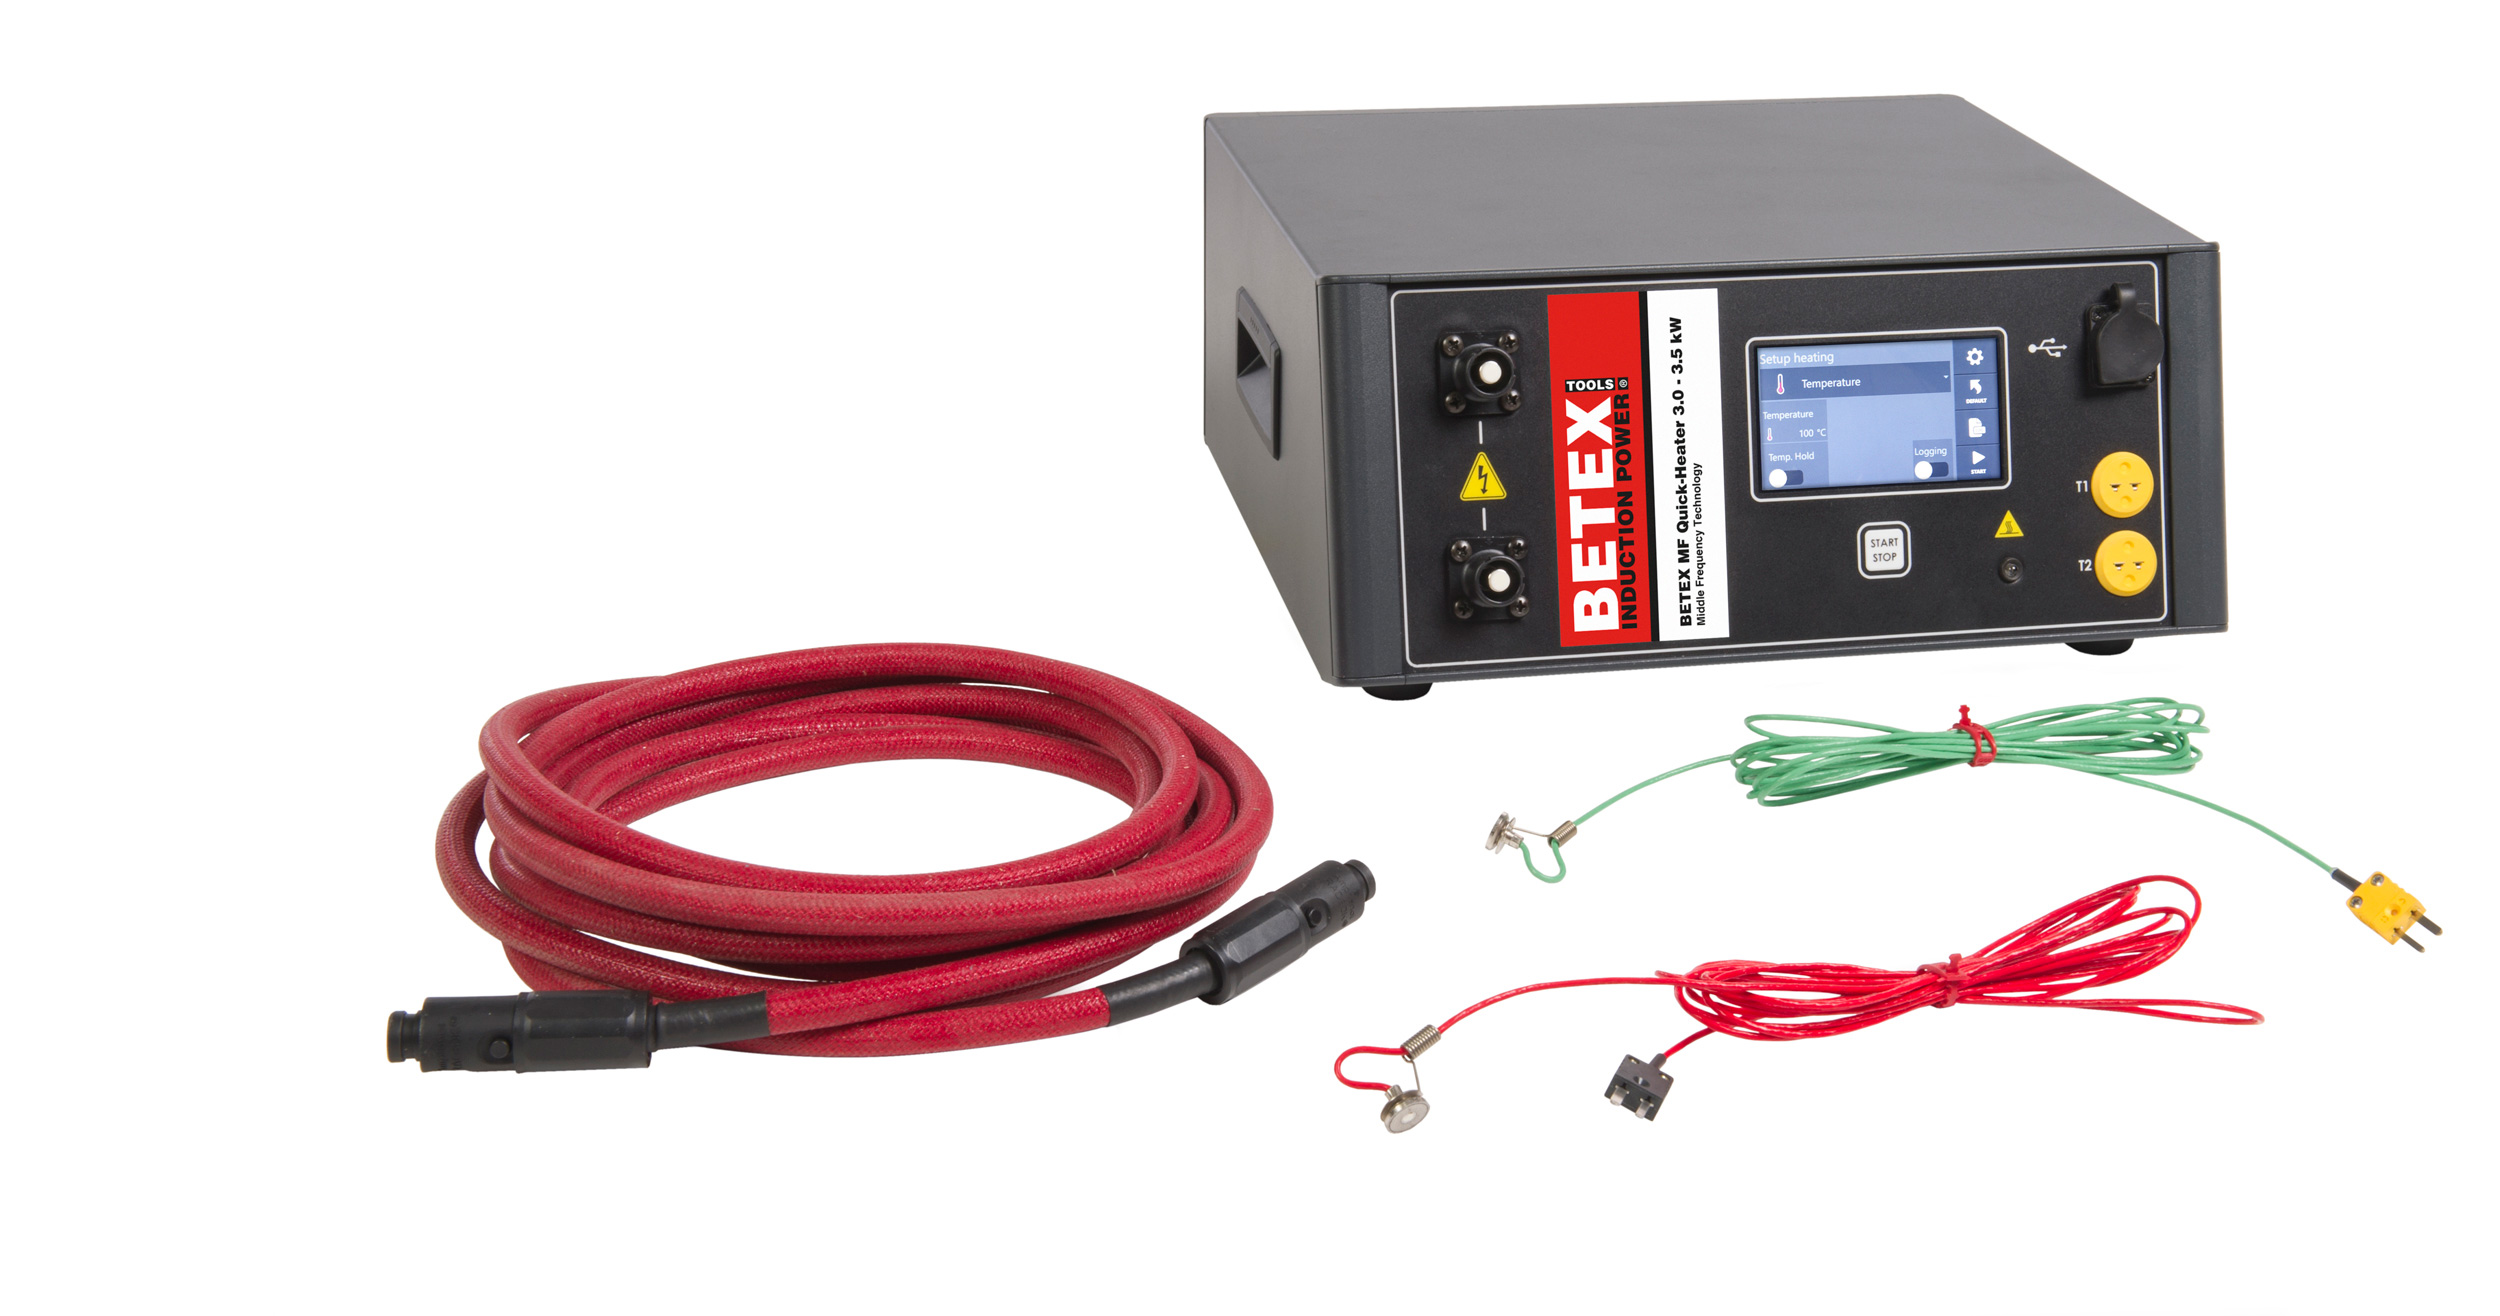 The MF Quick-Heater kit consists of one generator MF 3.0 – 3.5 kW, two magnetic temperature sensors, one pair of heat resistant gloves, flexible inductors in optional lengths of 5 m, 7.5 m and 10 m.